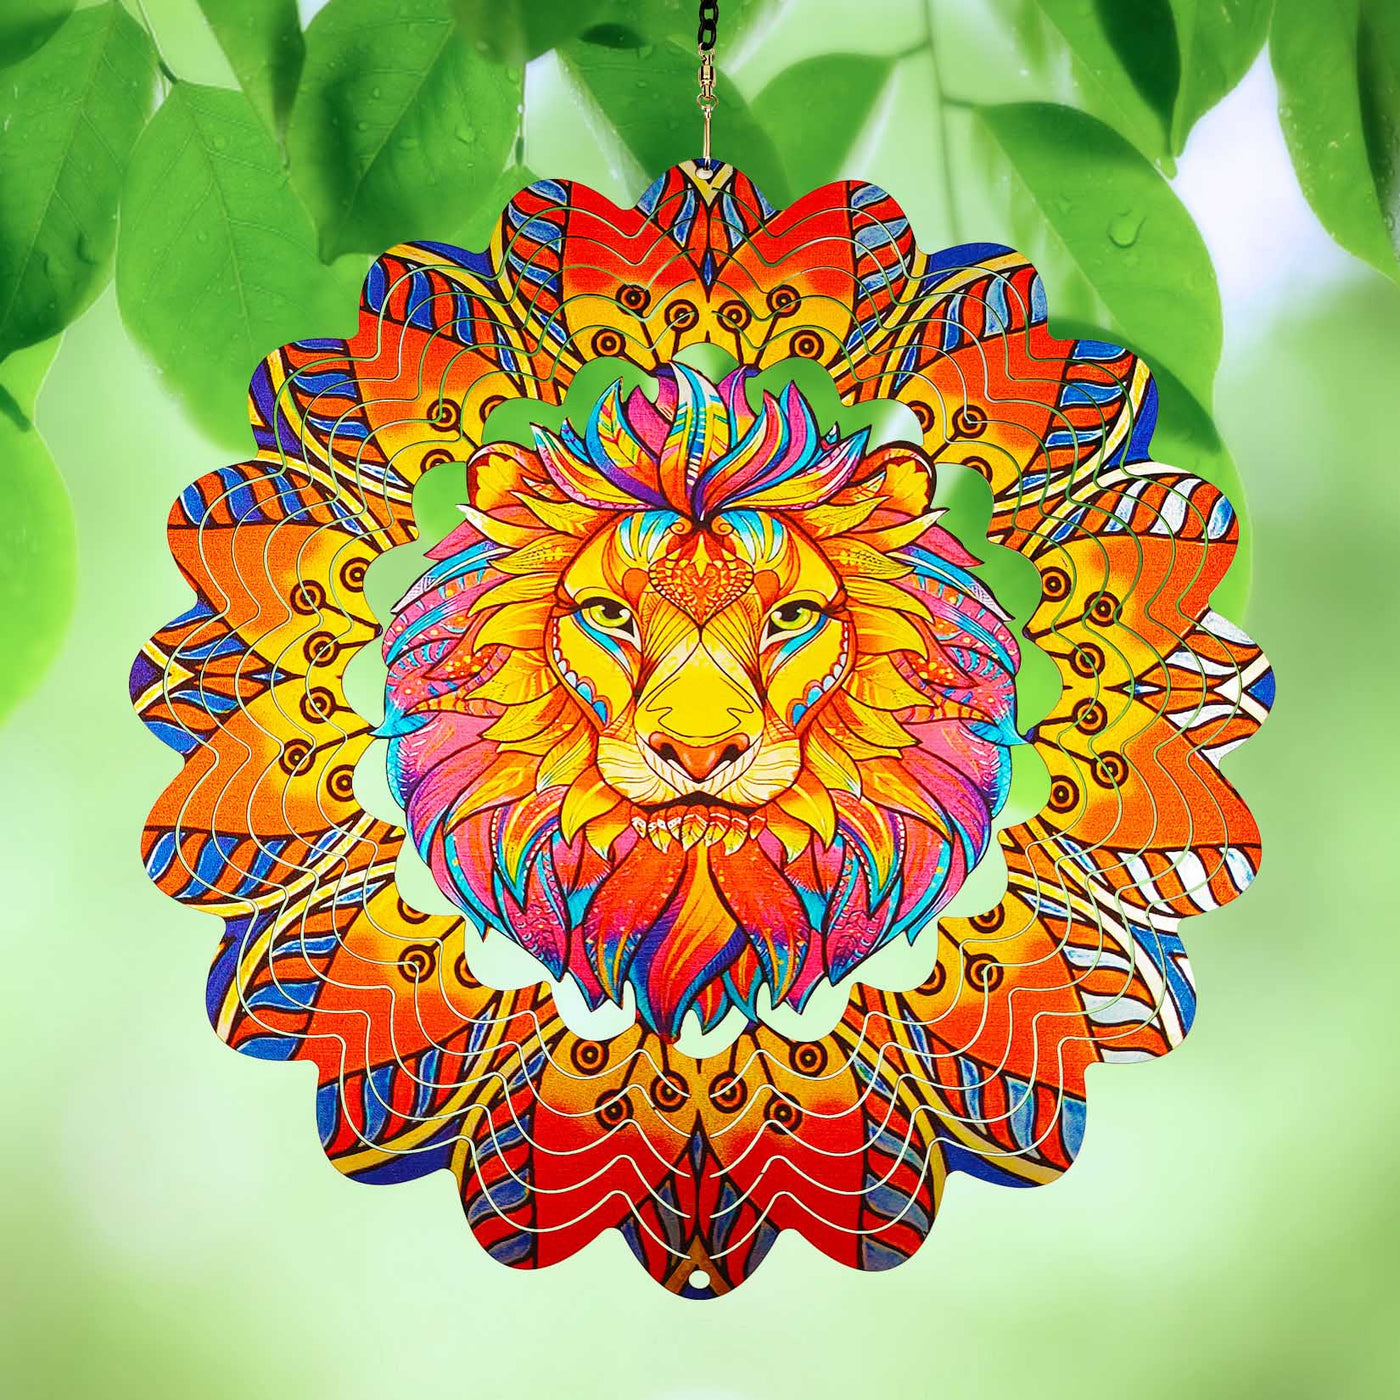 12'' Lion - 3D Magical Wind Kinetic Hanging Metal Wind Spinner